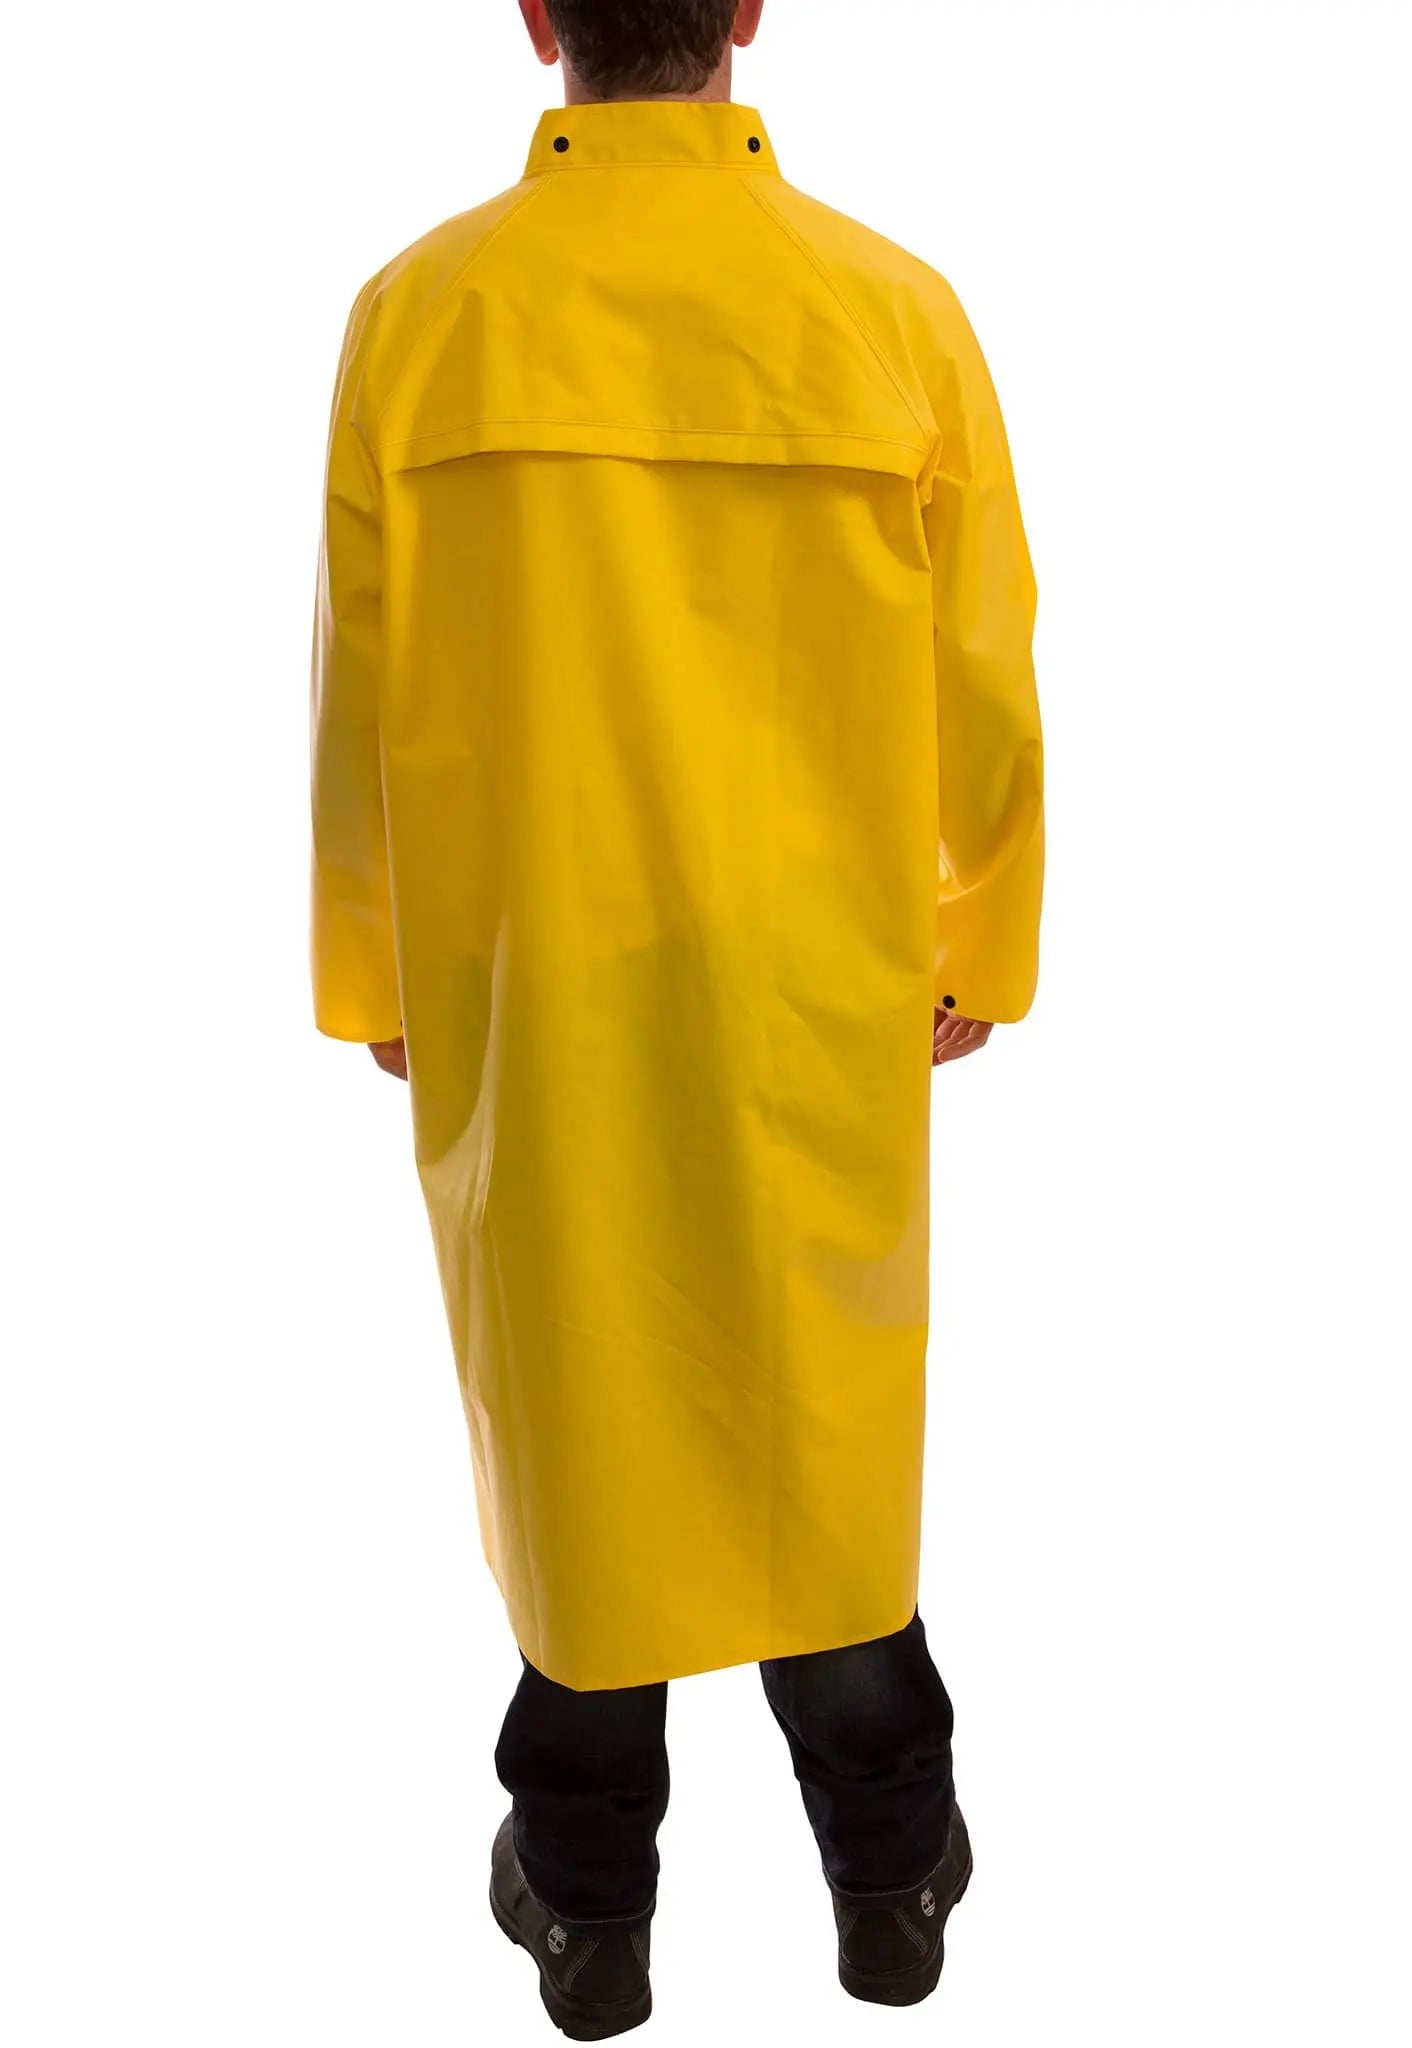 TINGLEY - FR 48" DuraScrim Coat Yellow - Becker Safety and Supply